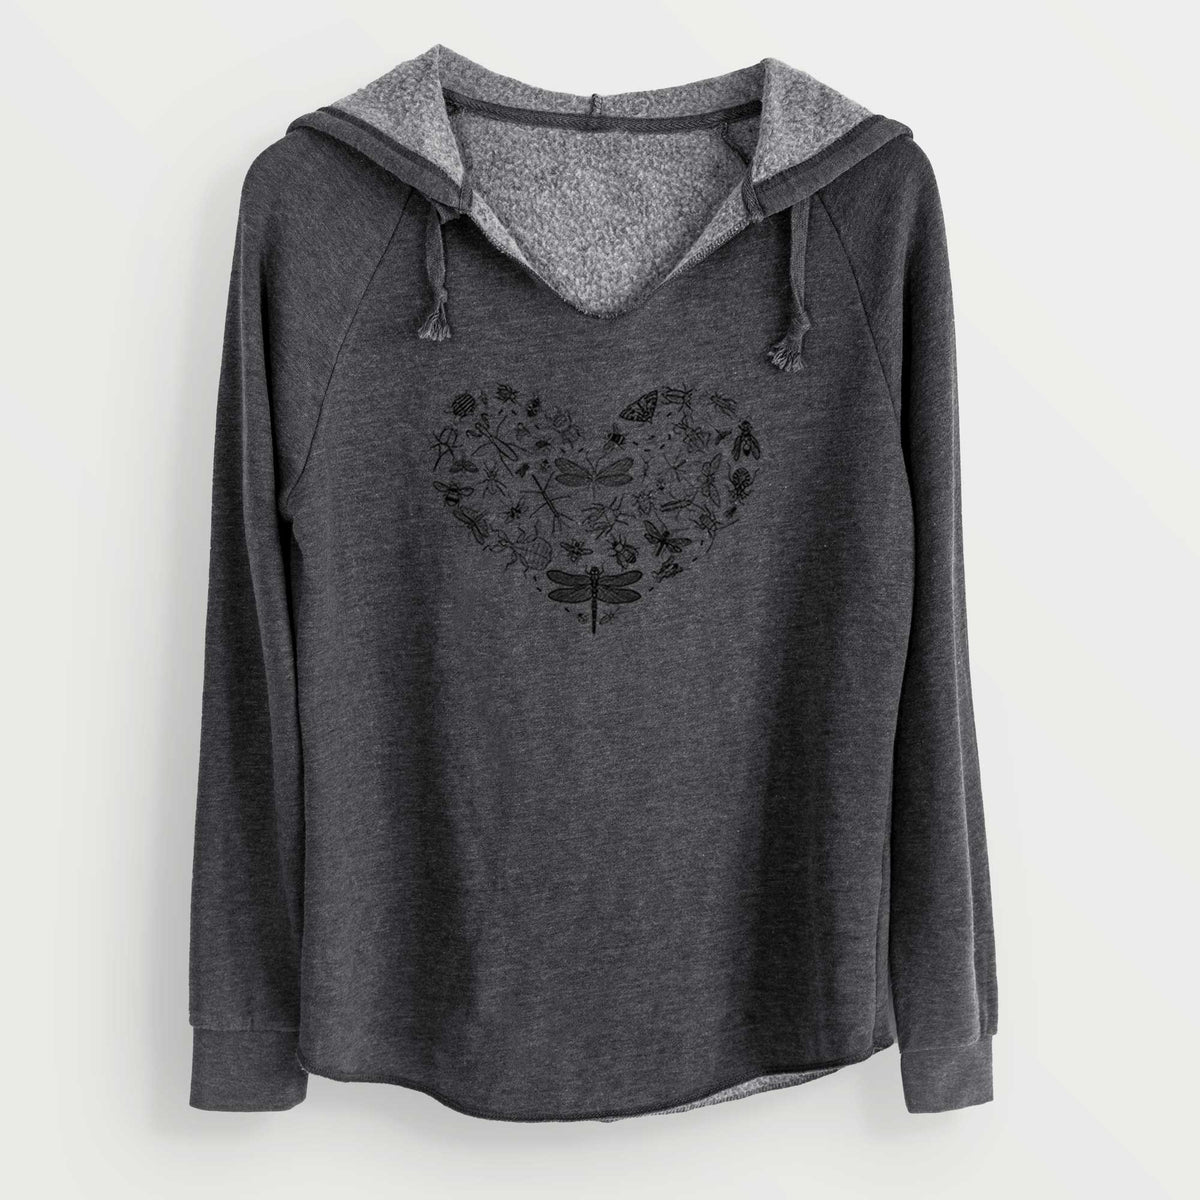 Heart Full of Insects - Cali Wave Hooded Sweatshirt